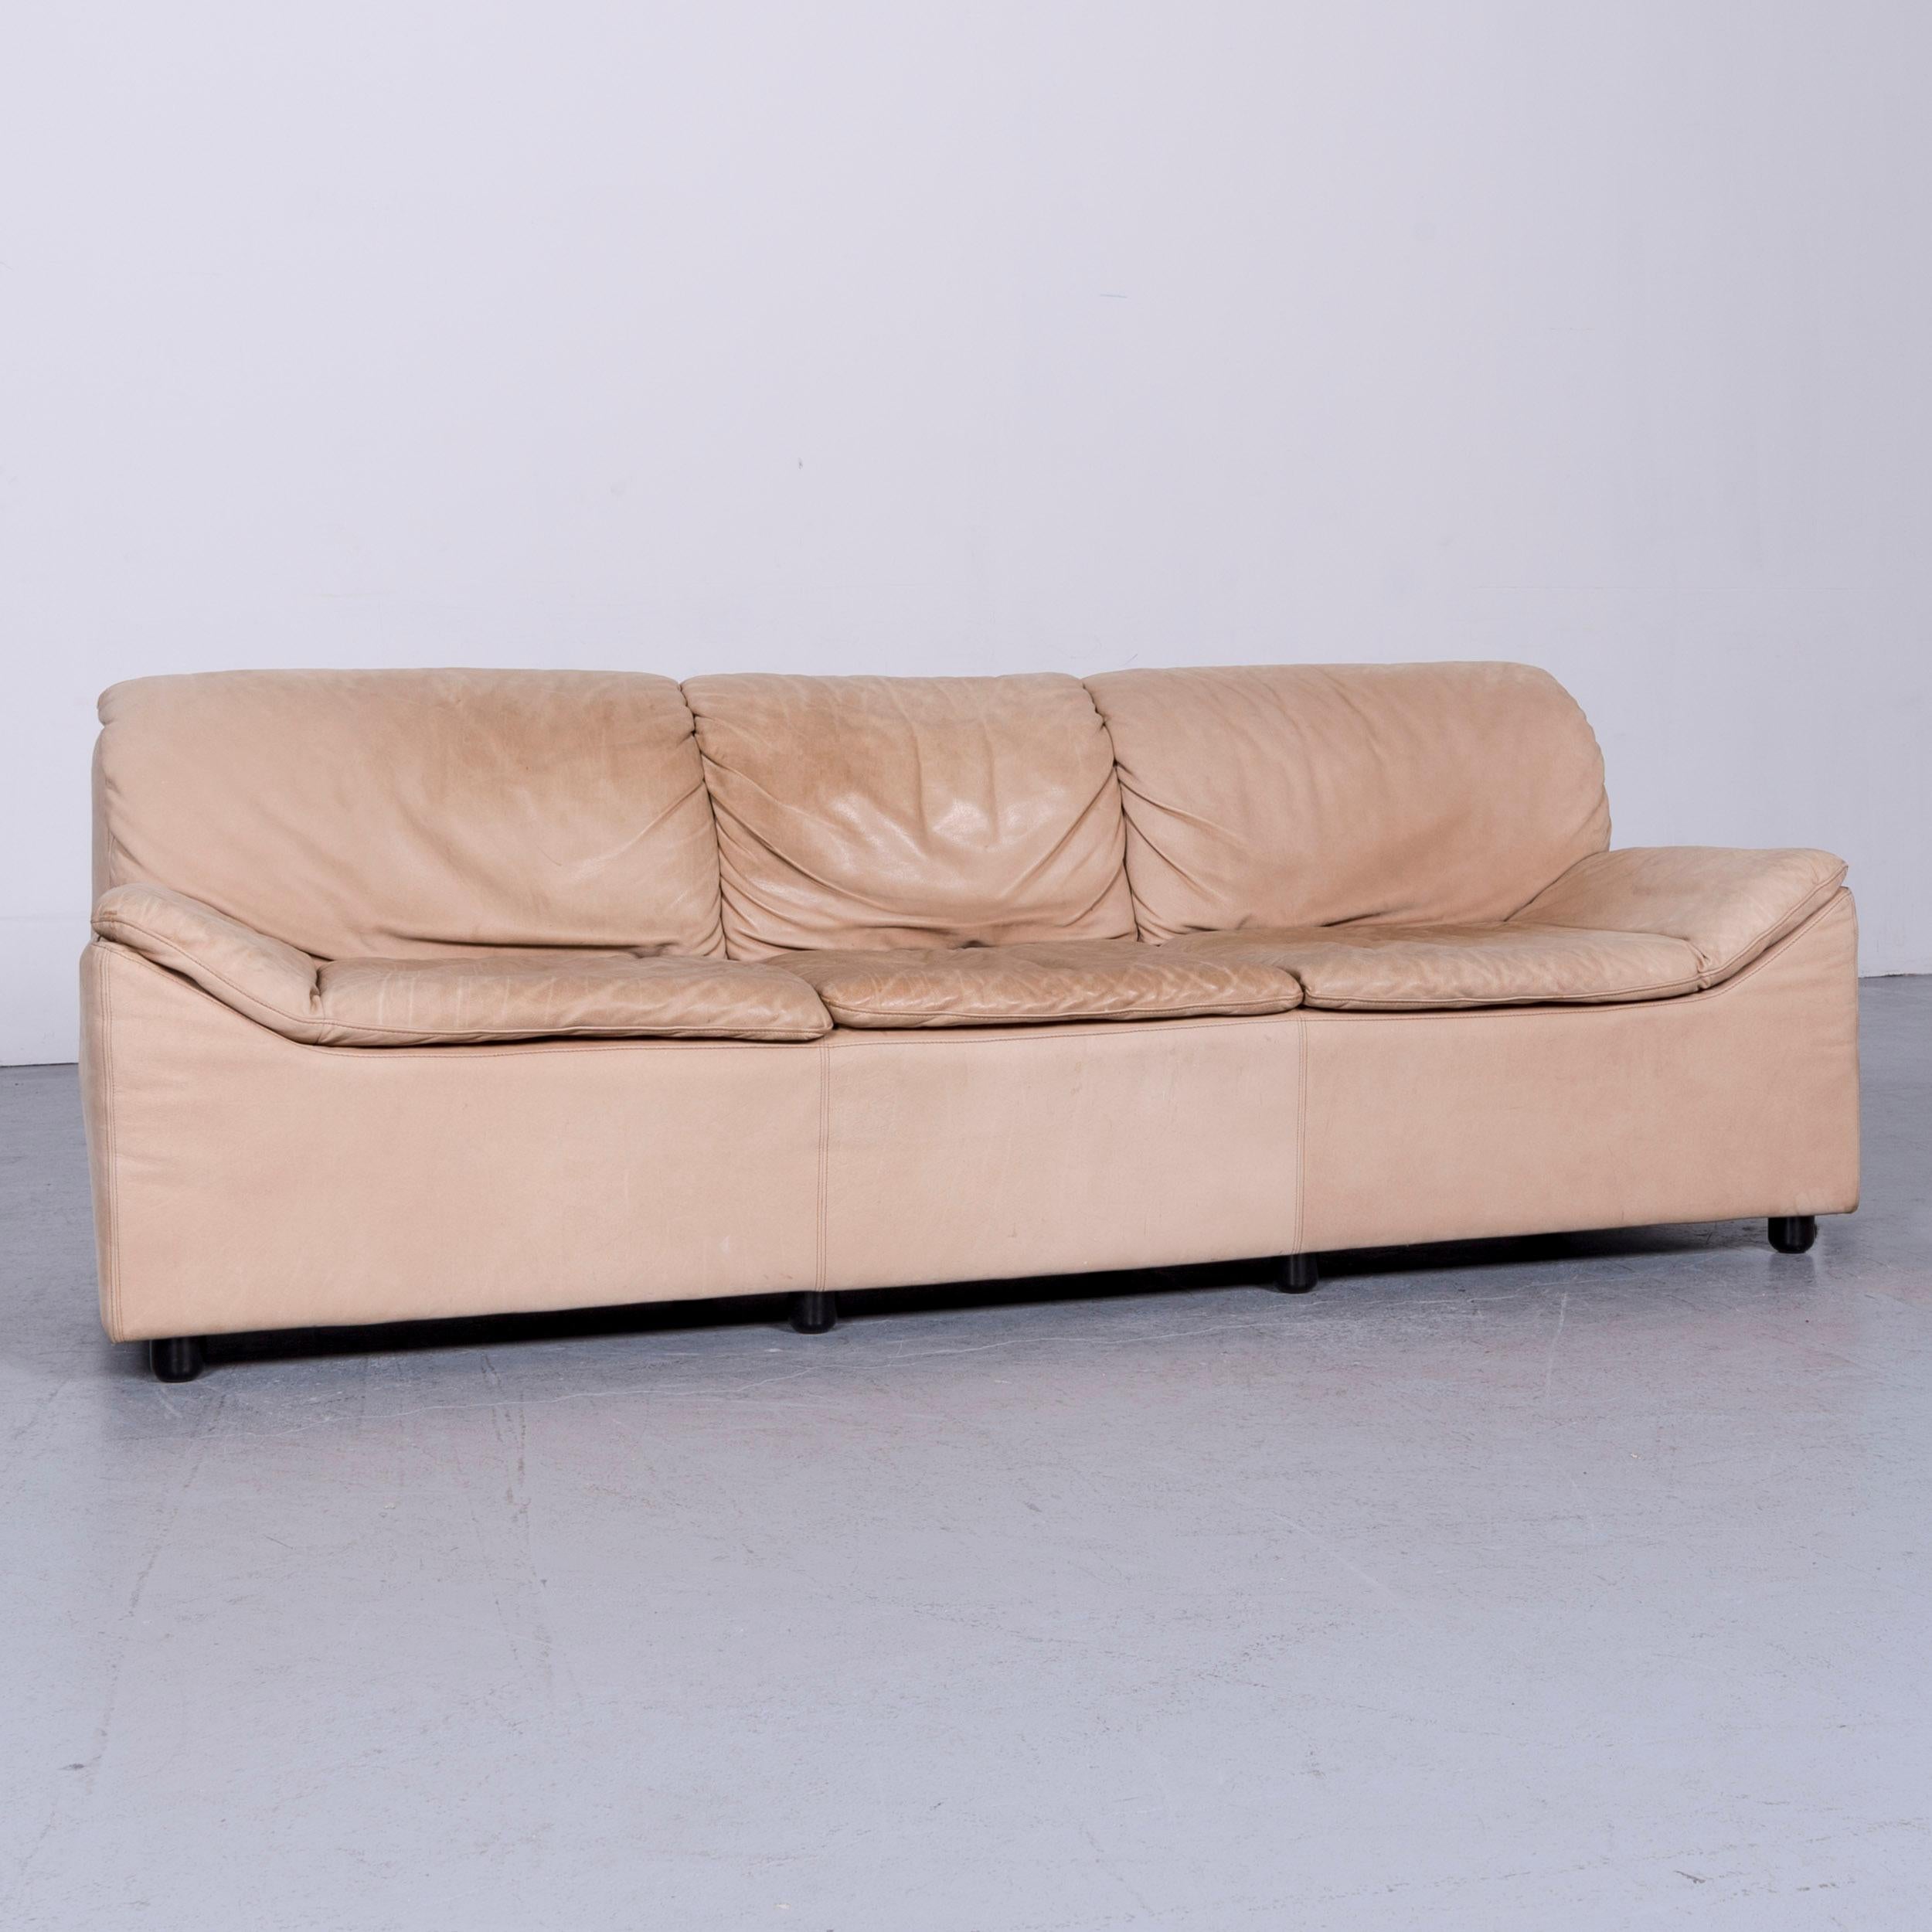 We bring to you an Kill International Golf designer sofa leather beige three-seat couch from 1984.